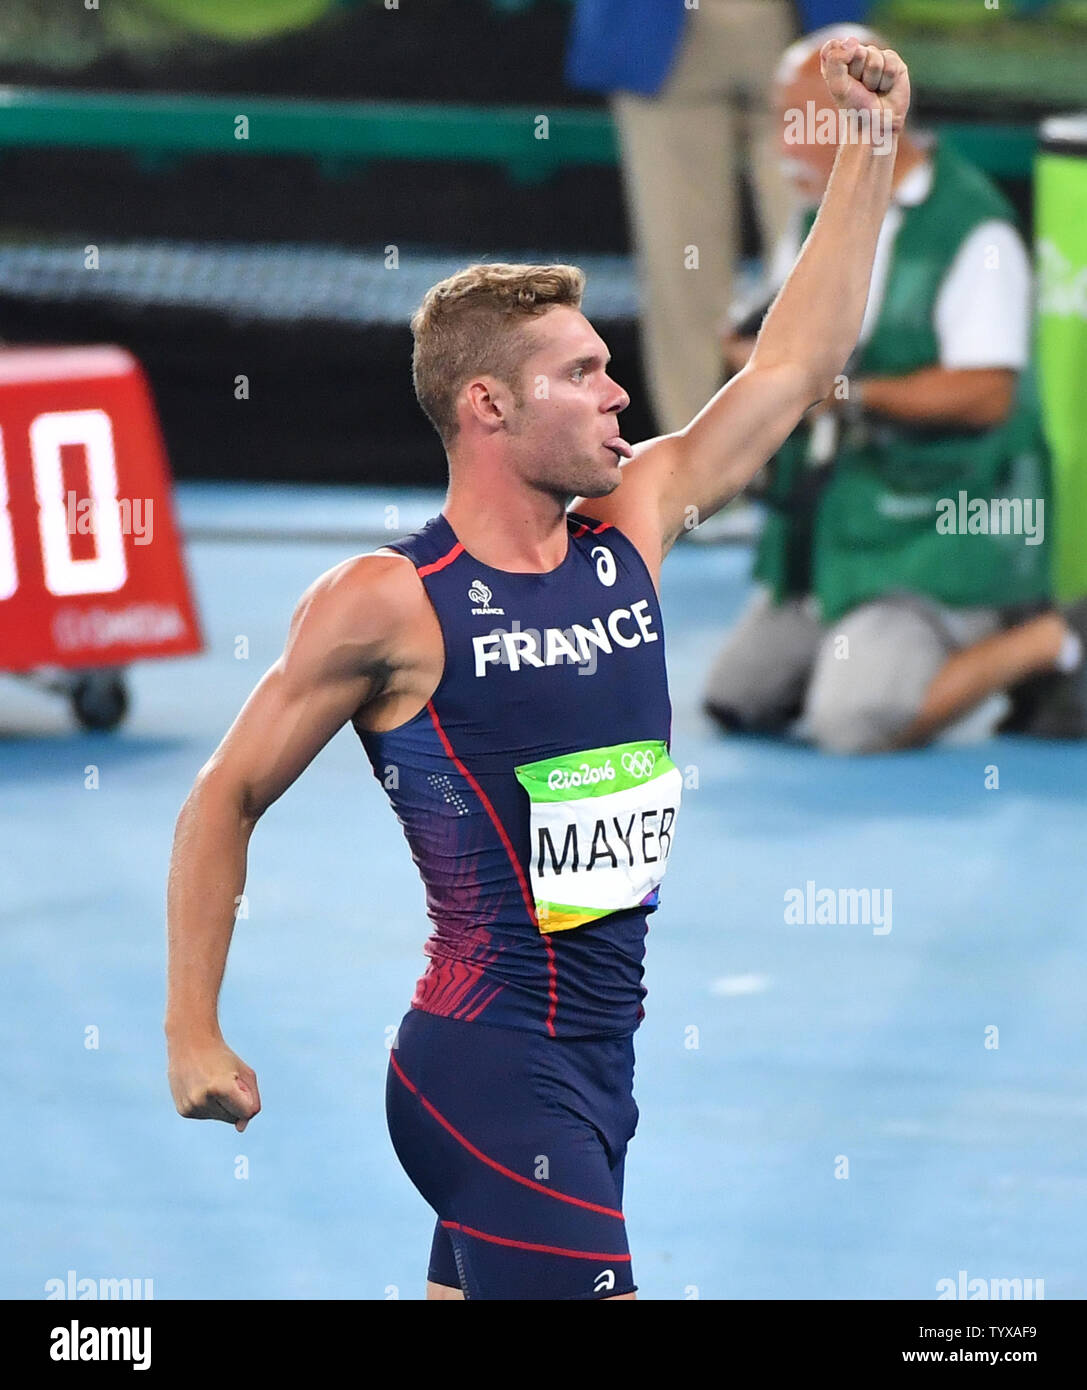 Kevin Mayer of France reacts after a jump when he competes in the Men's Decathlon High Jump at the Olympic Stadium at the 2016 Rio Summer Olympics in Rio de Janeiro, Brazil, on August 17, 2016.        Photo by Kevin Dietsch/UPI Stock Photo